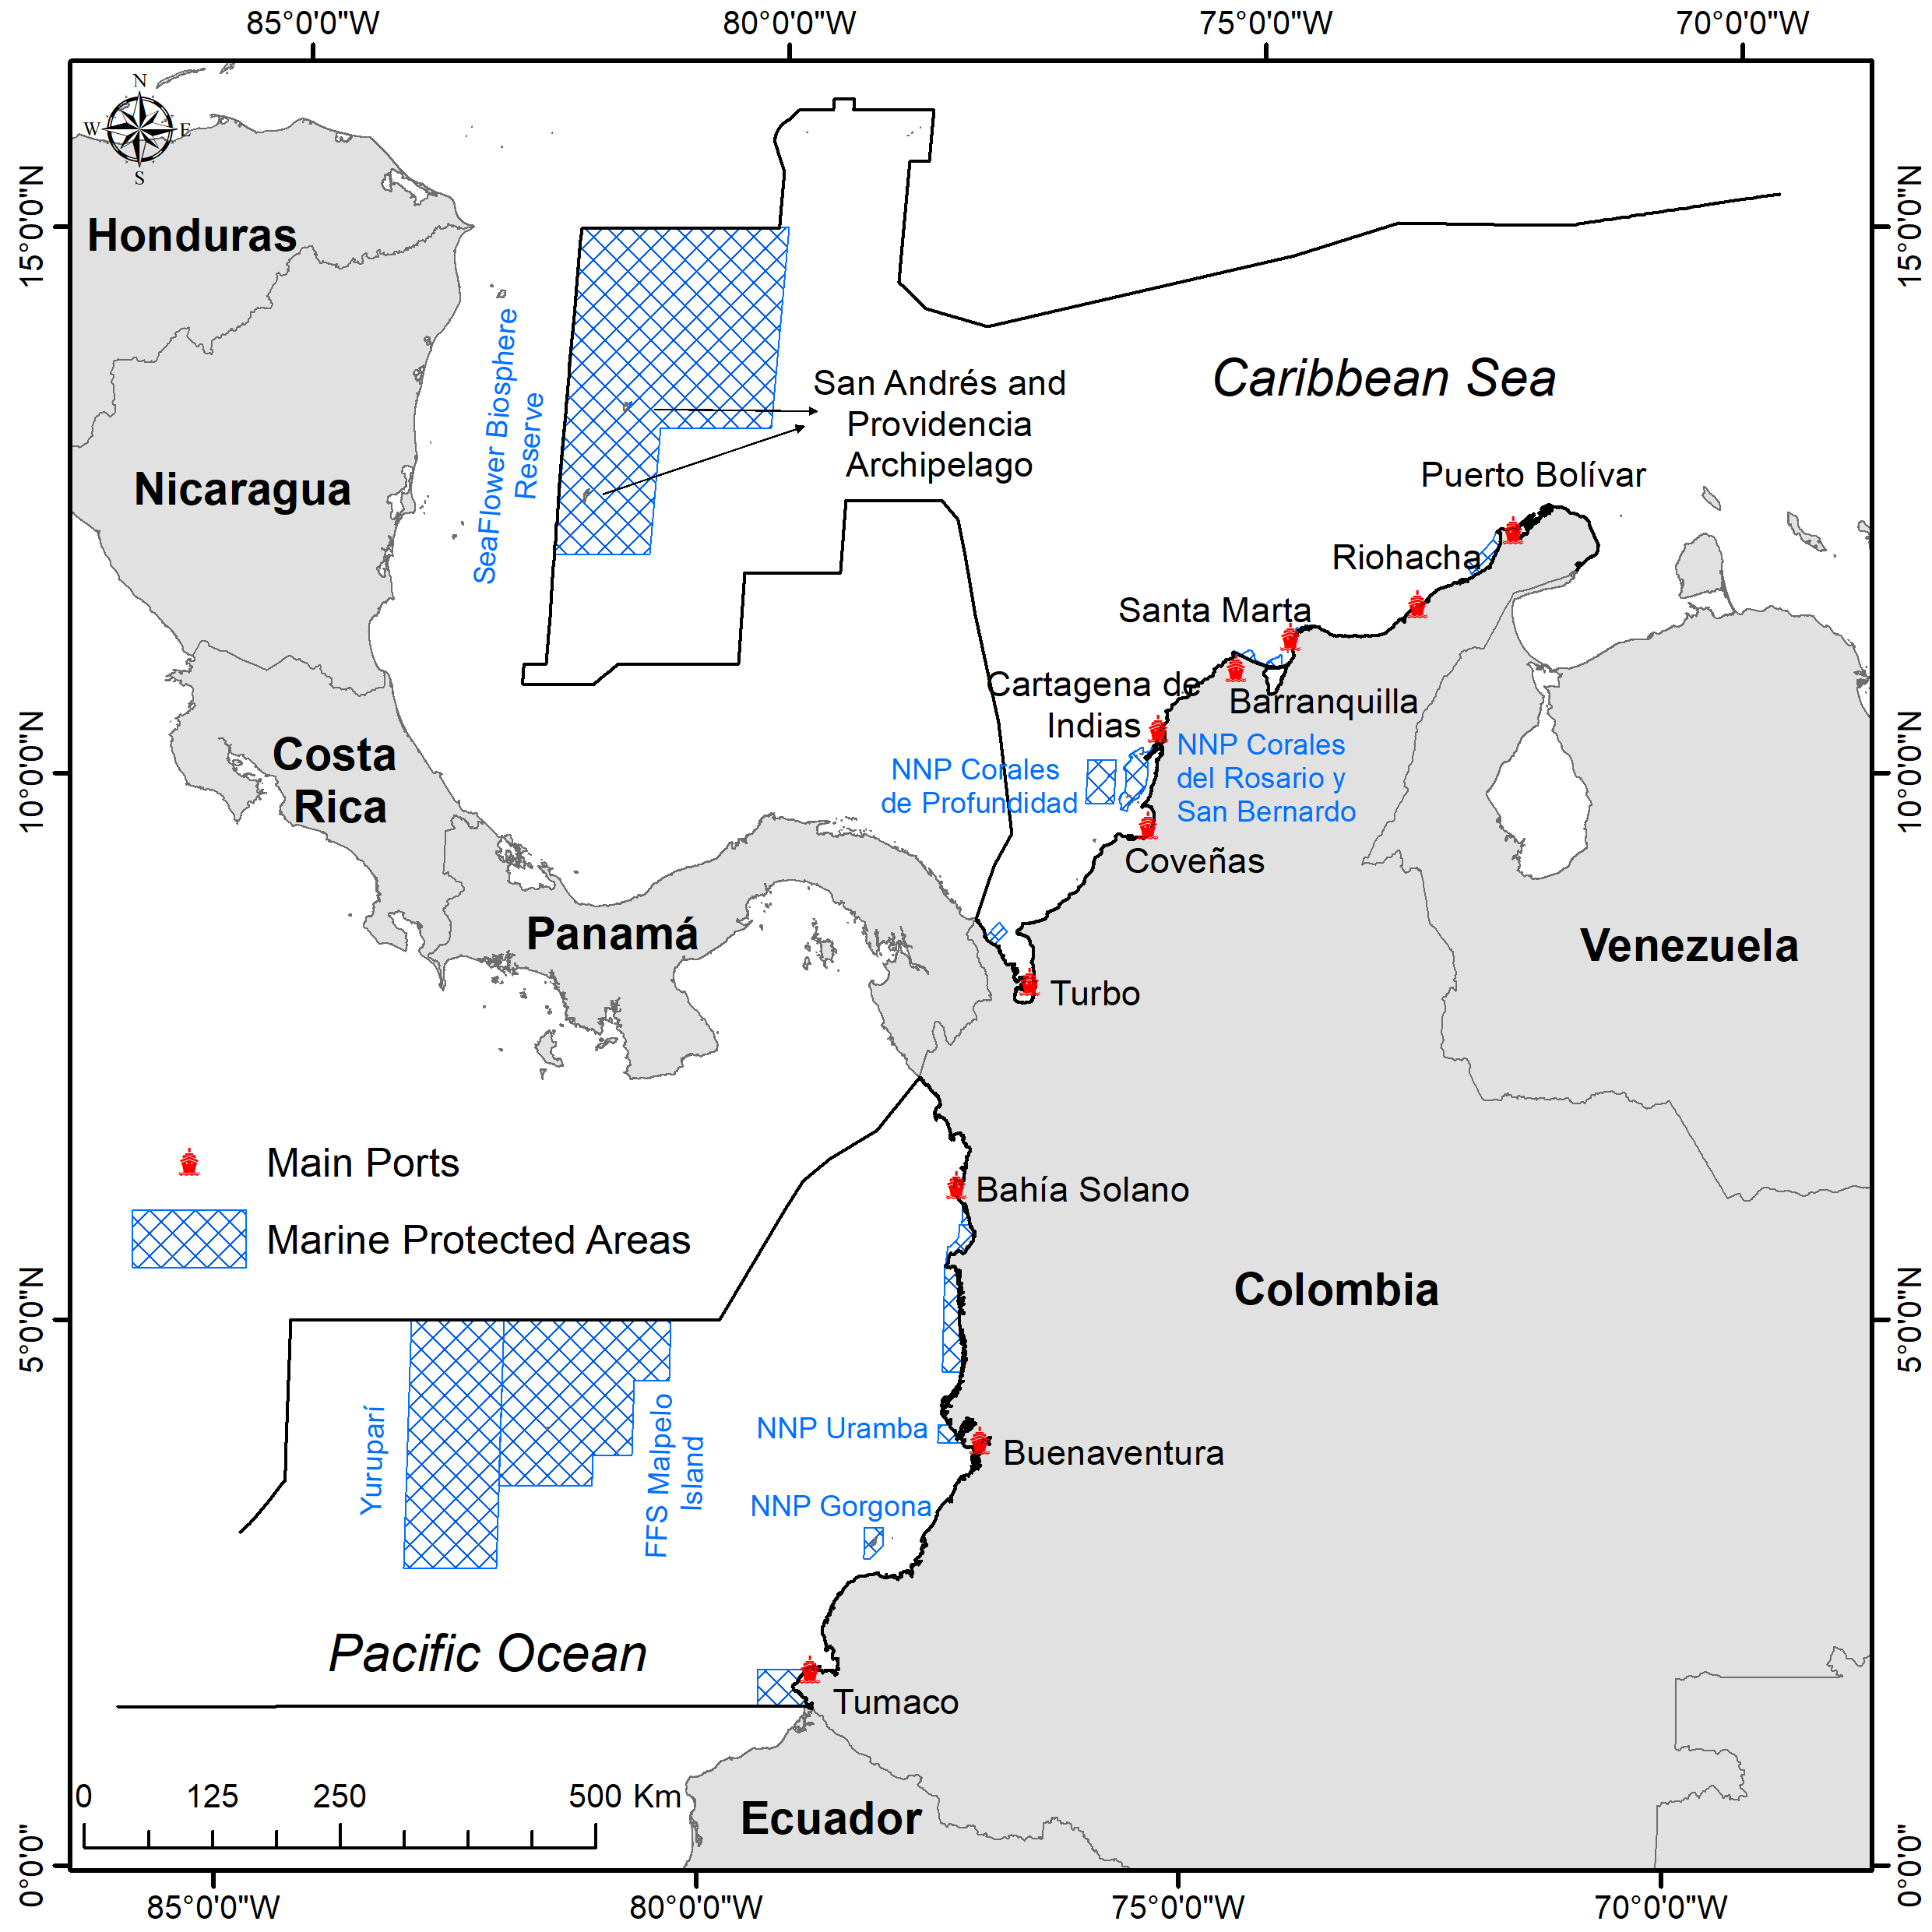 **Figure 1.** Study area with the location of marine protected areas and main ports in the Colombian Exclusive Economic Zone (EEZ).